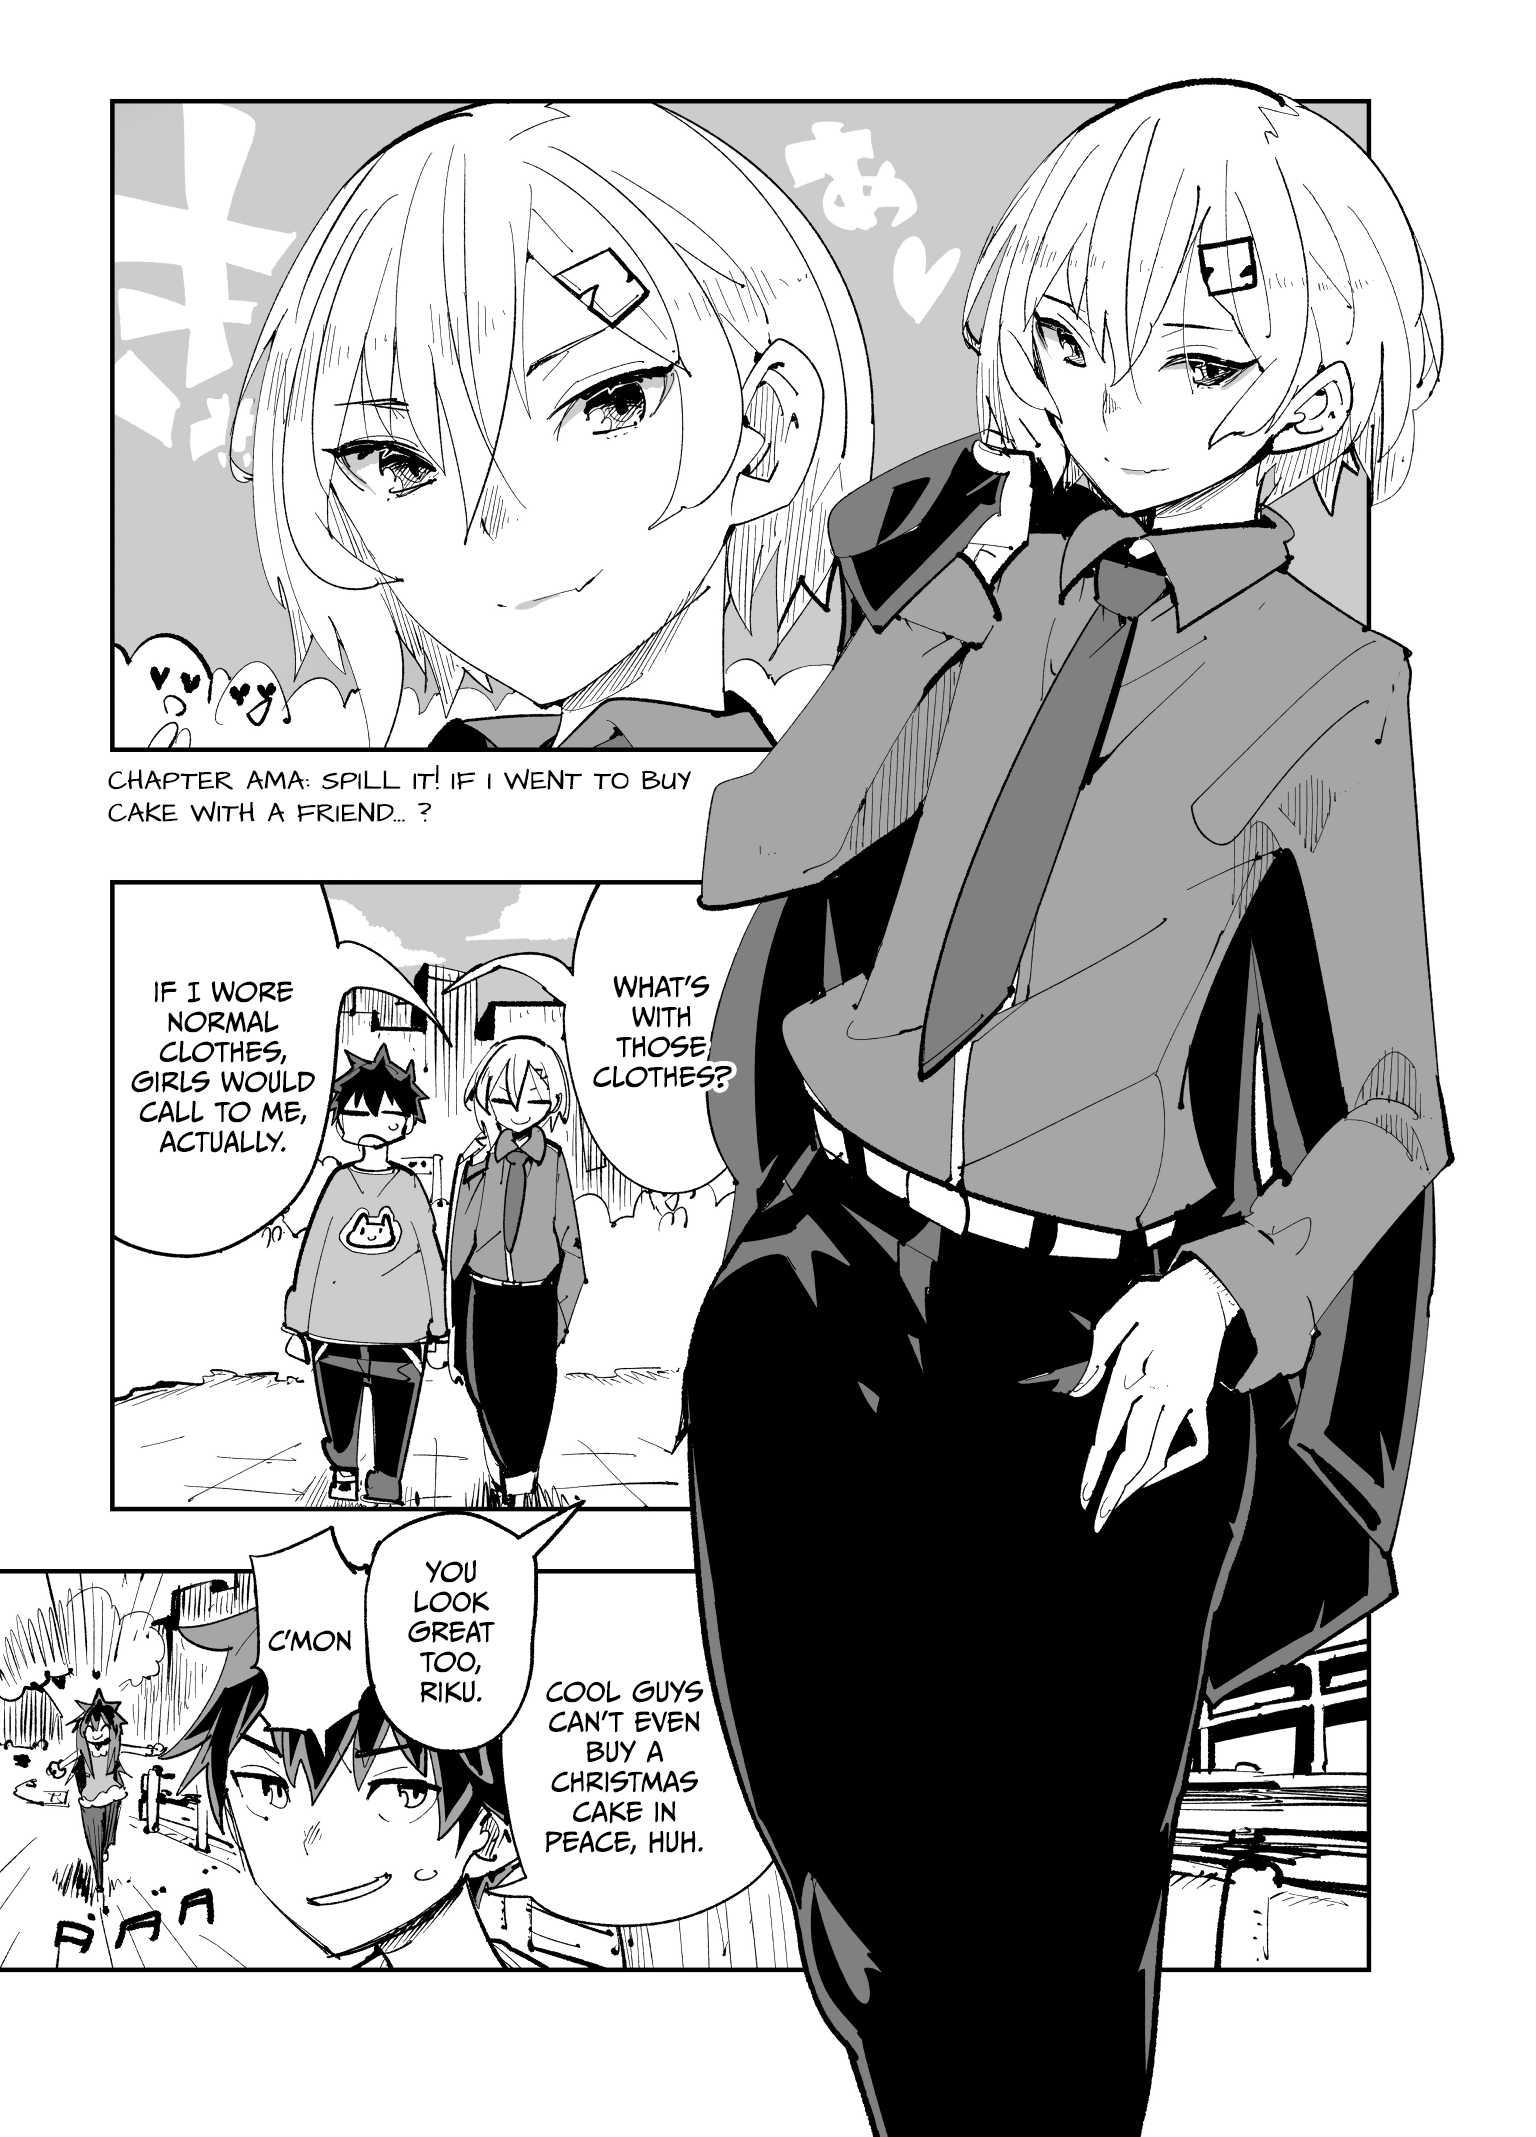 Spill It, Cocktail Knights! Chapter 23